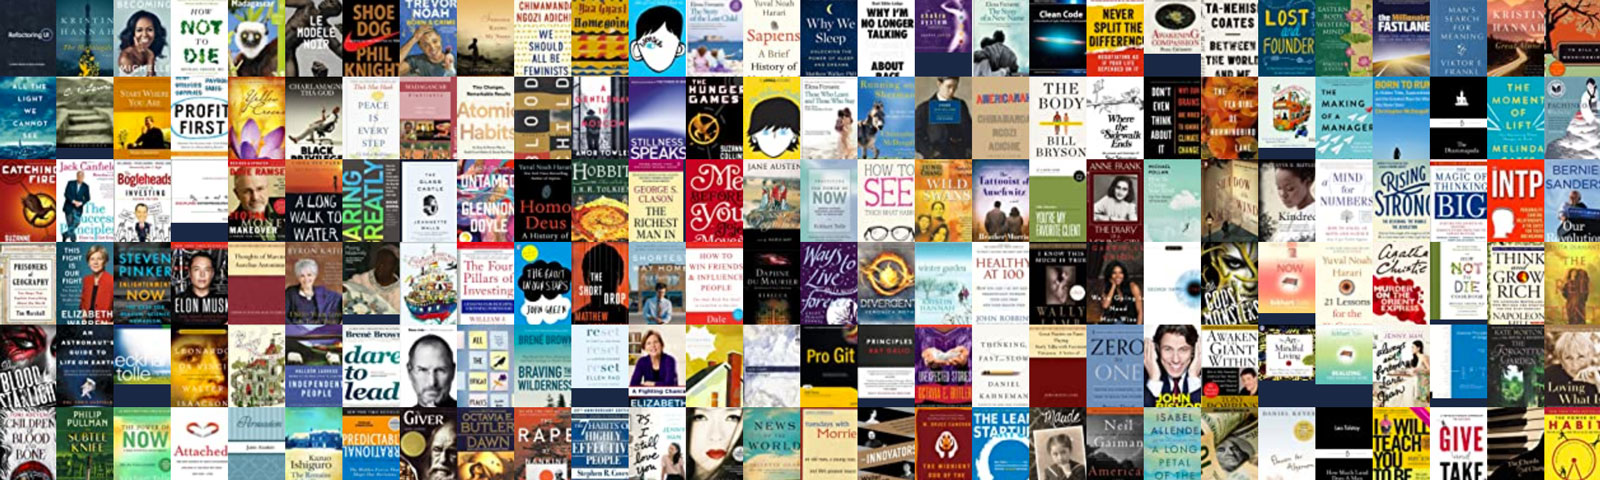 A collage of many book covers